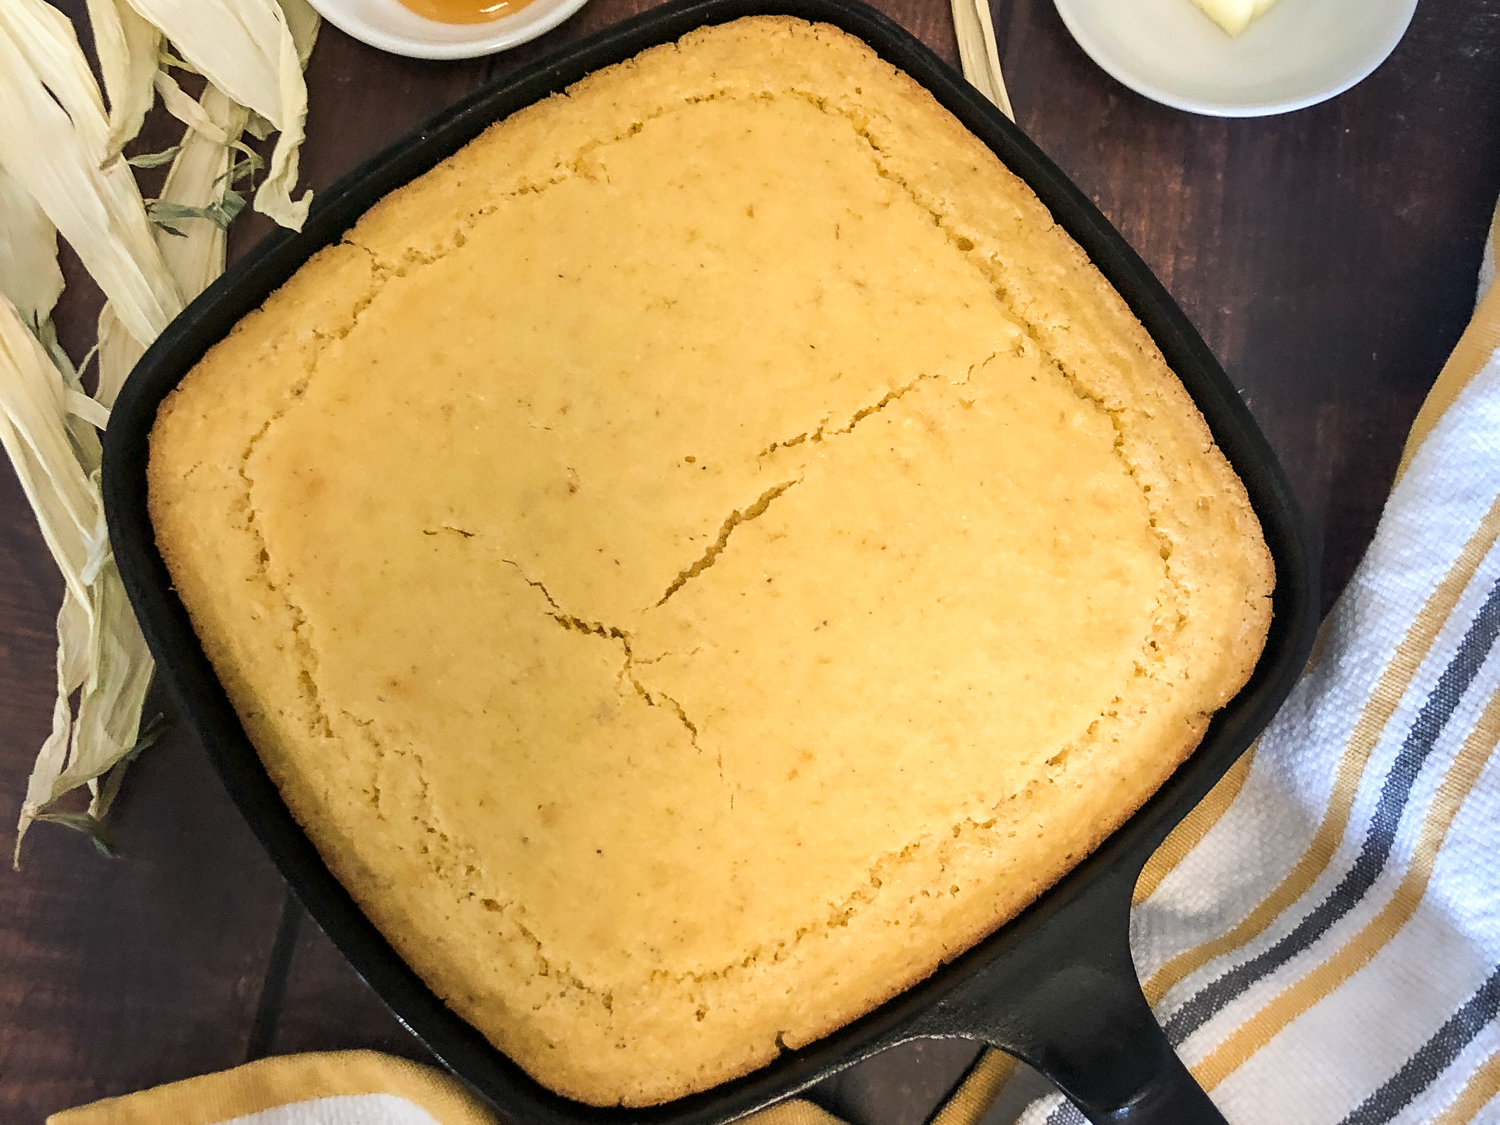 Creamed Corn Cornbread still in the skillet ready to be served.